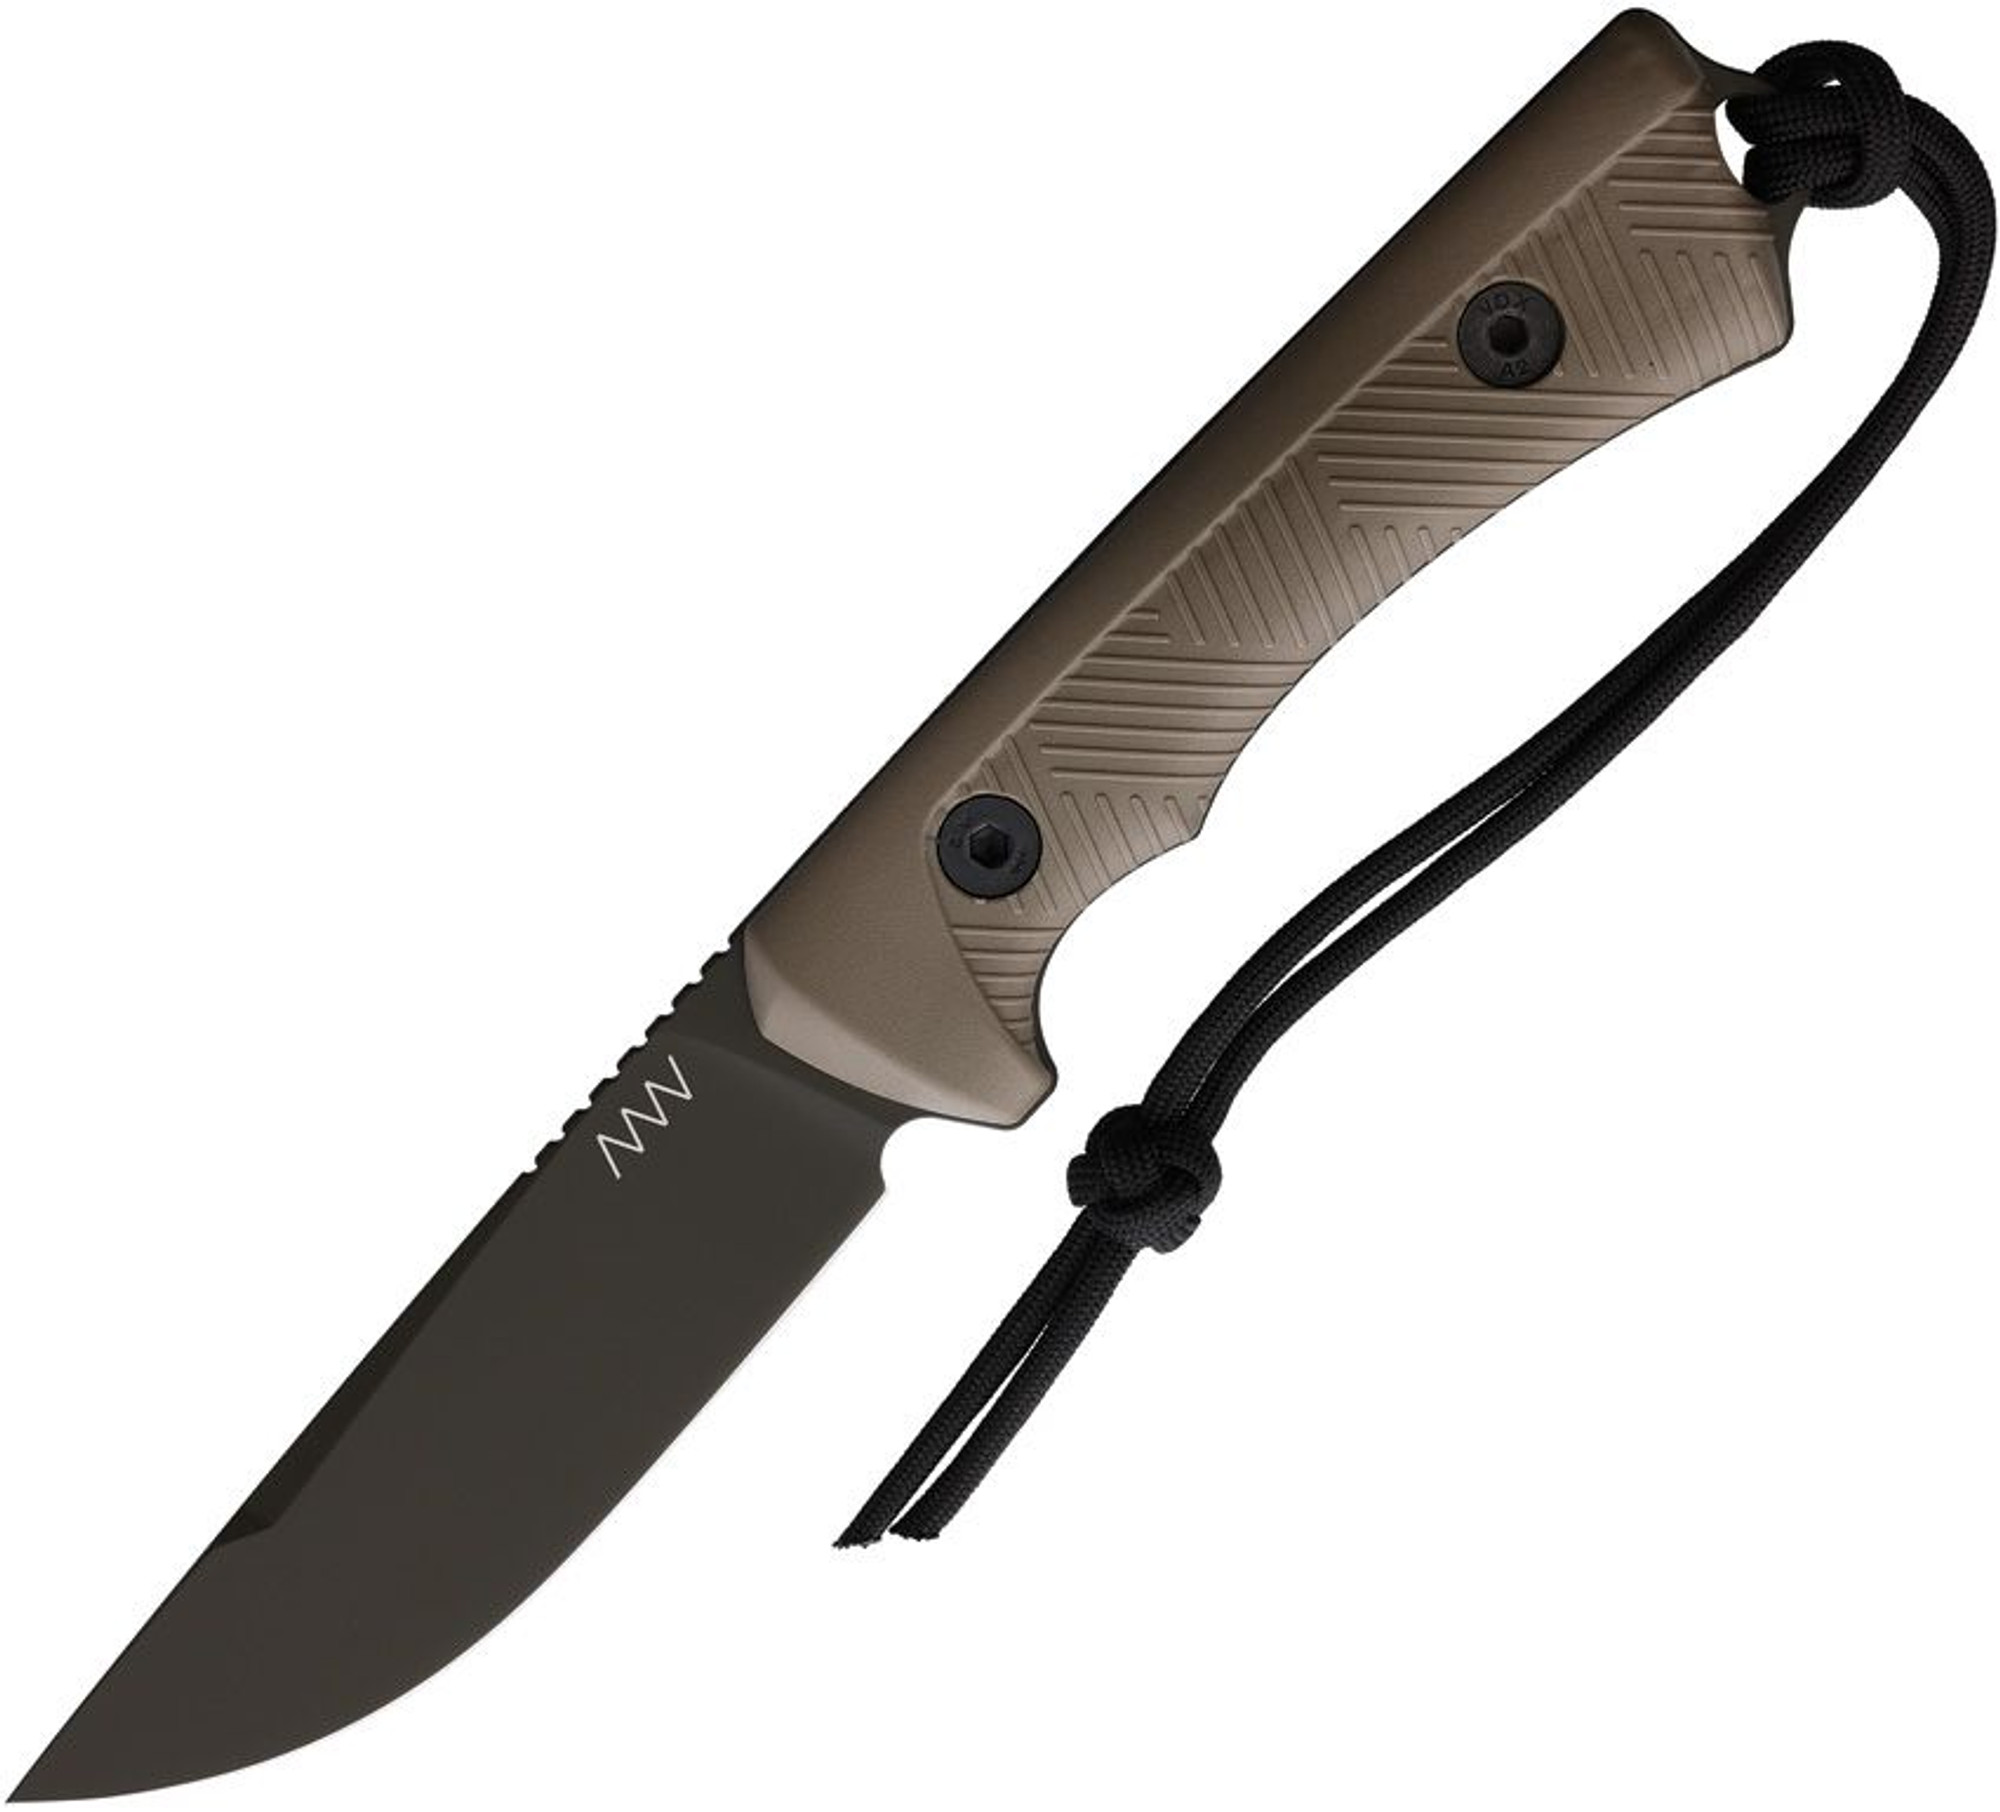 P200 Fixed Blade OD/Coy
